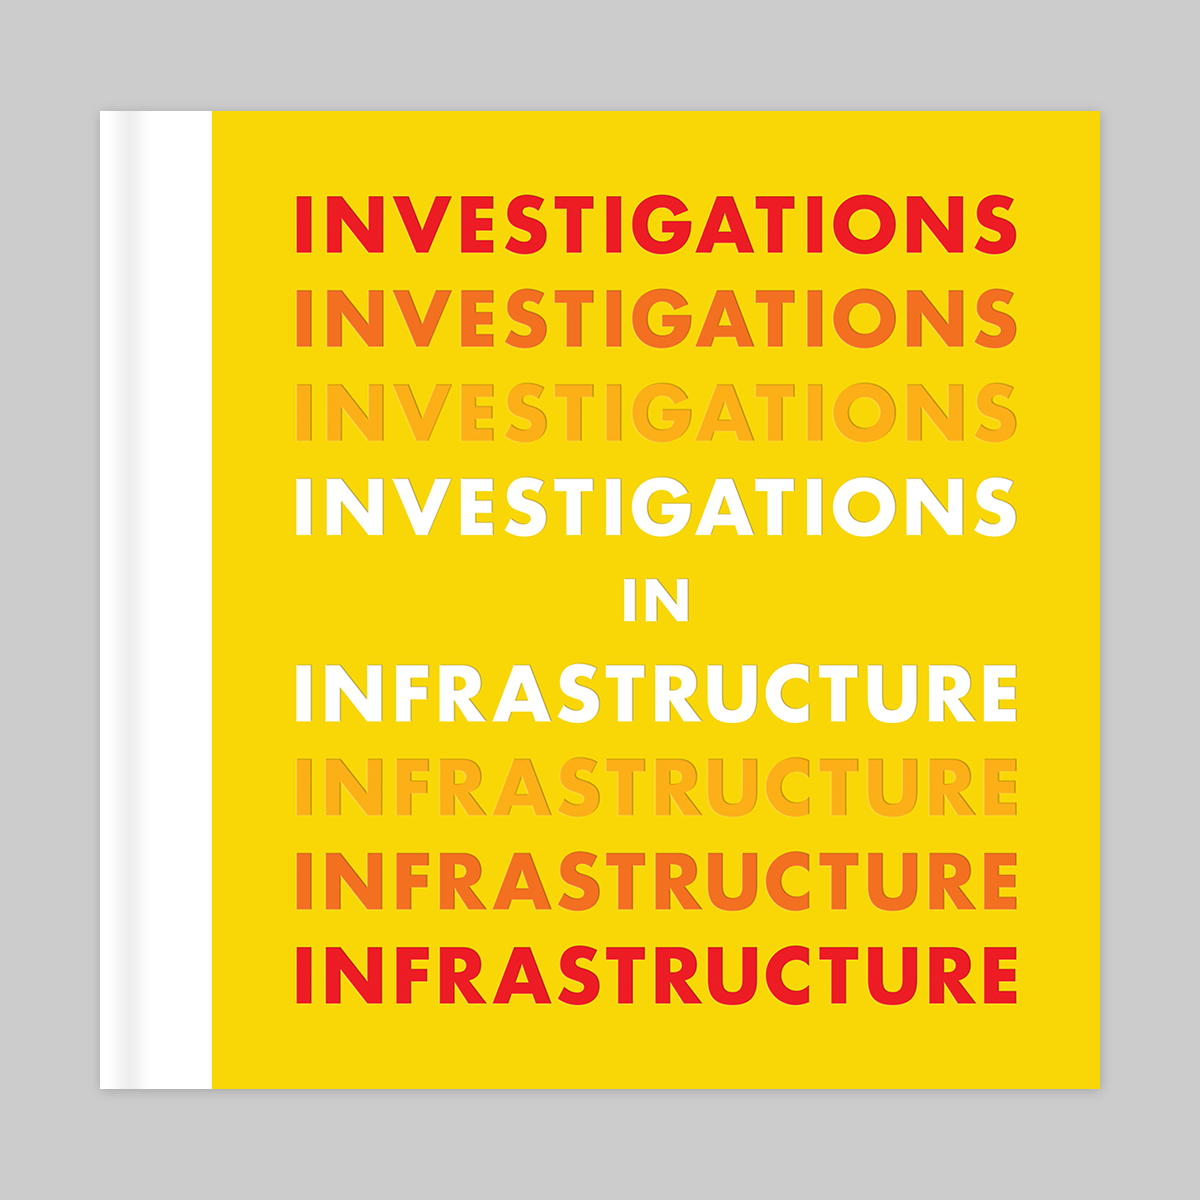 Investigations In Infrastructure - Published by Subjective Objective